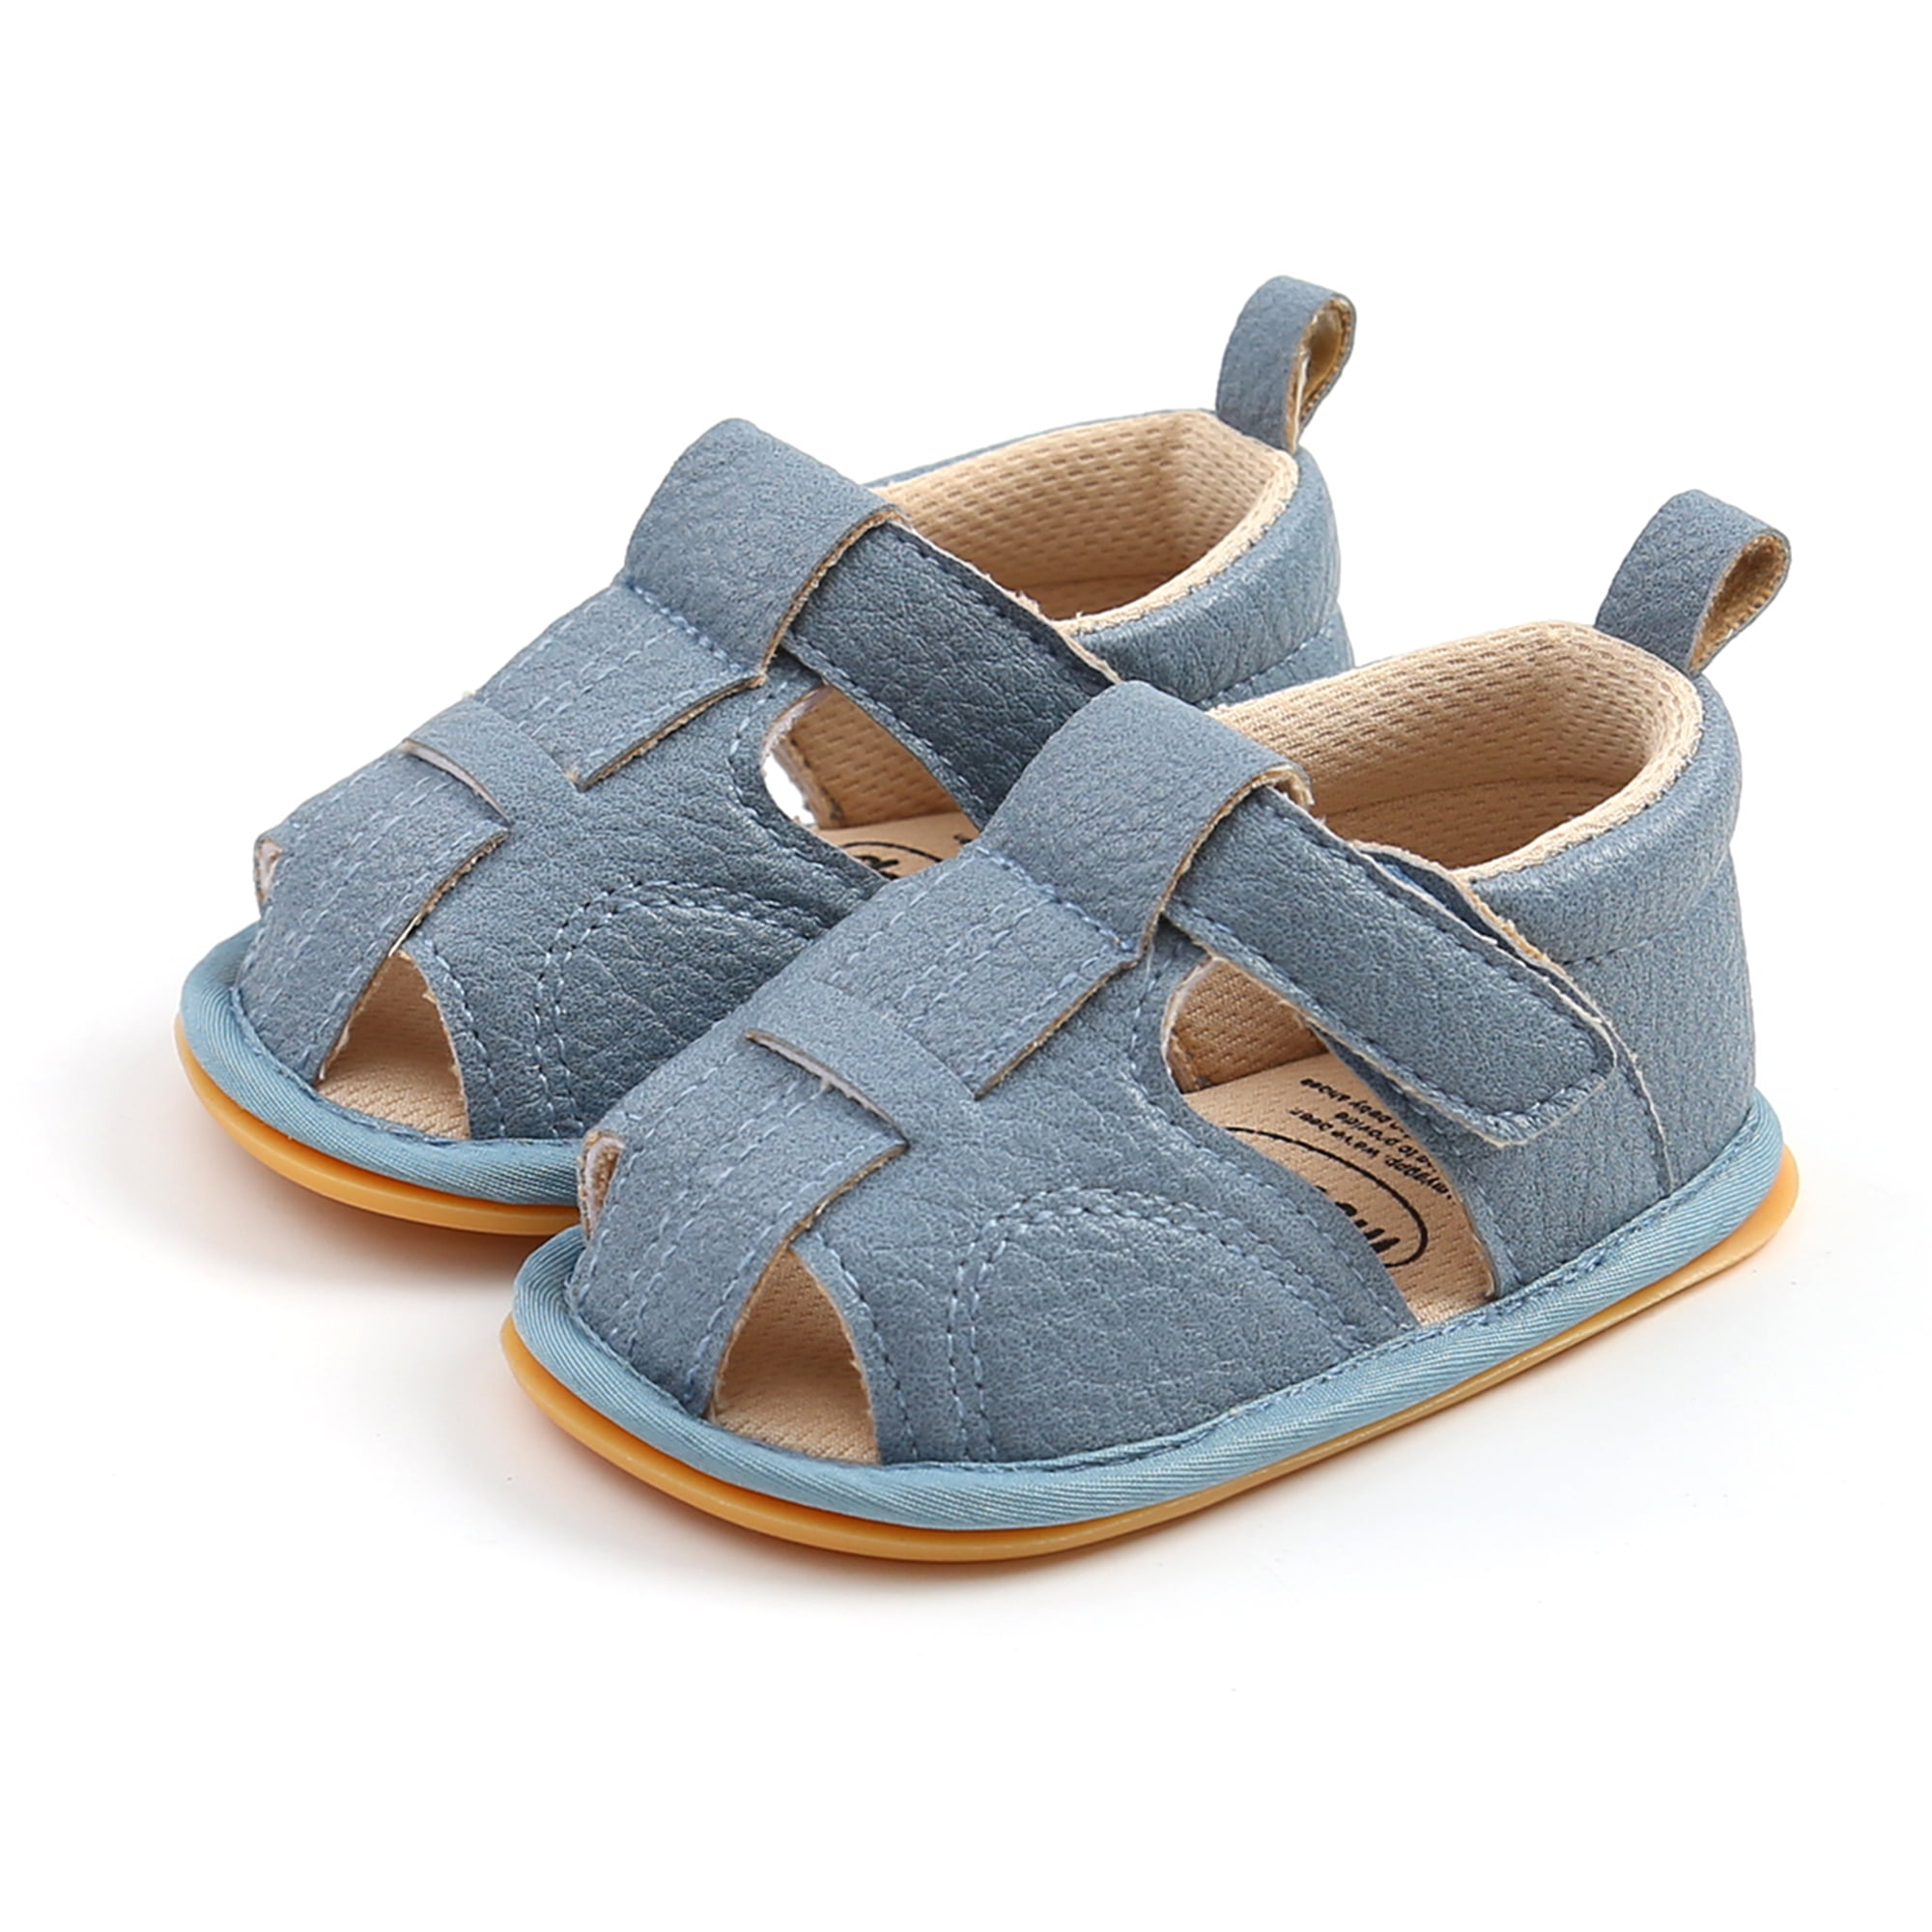 Newborn Baby Girls Boys Summer Roman Shoes Sandals First Walkers Soft Sole Shoes